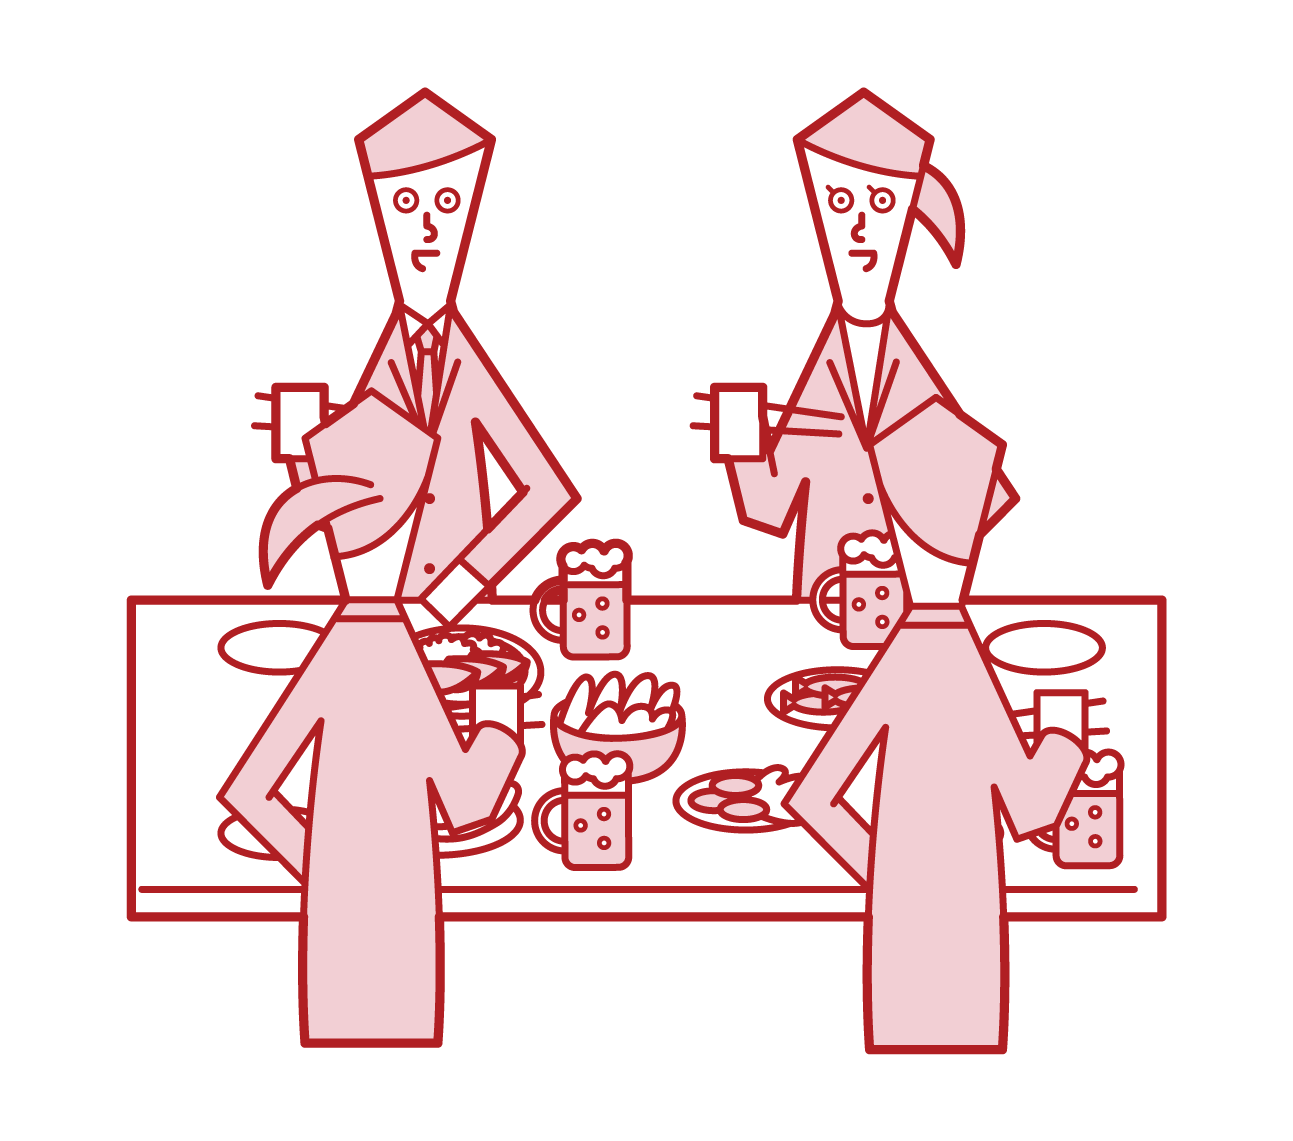 Illustration of people (men and women) enjoying a meal at a drinking party